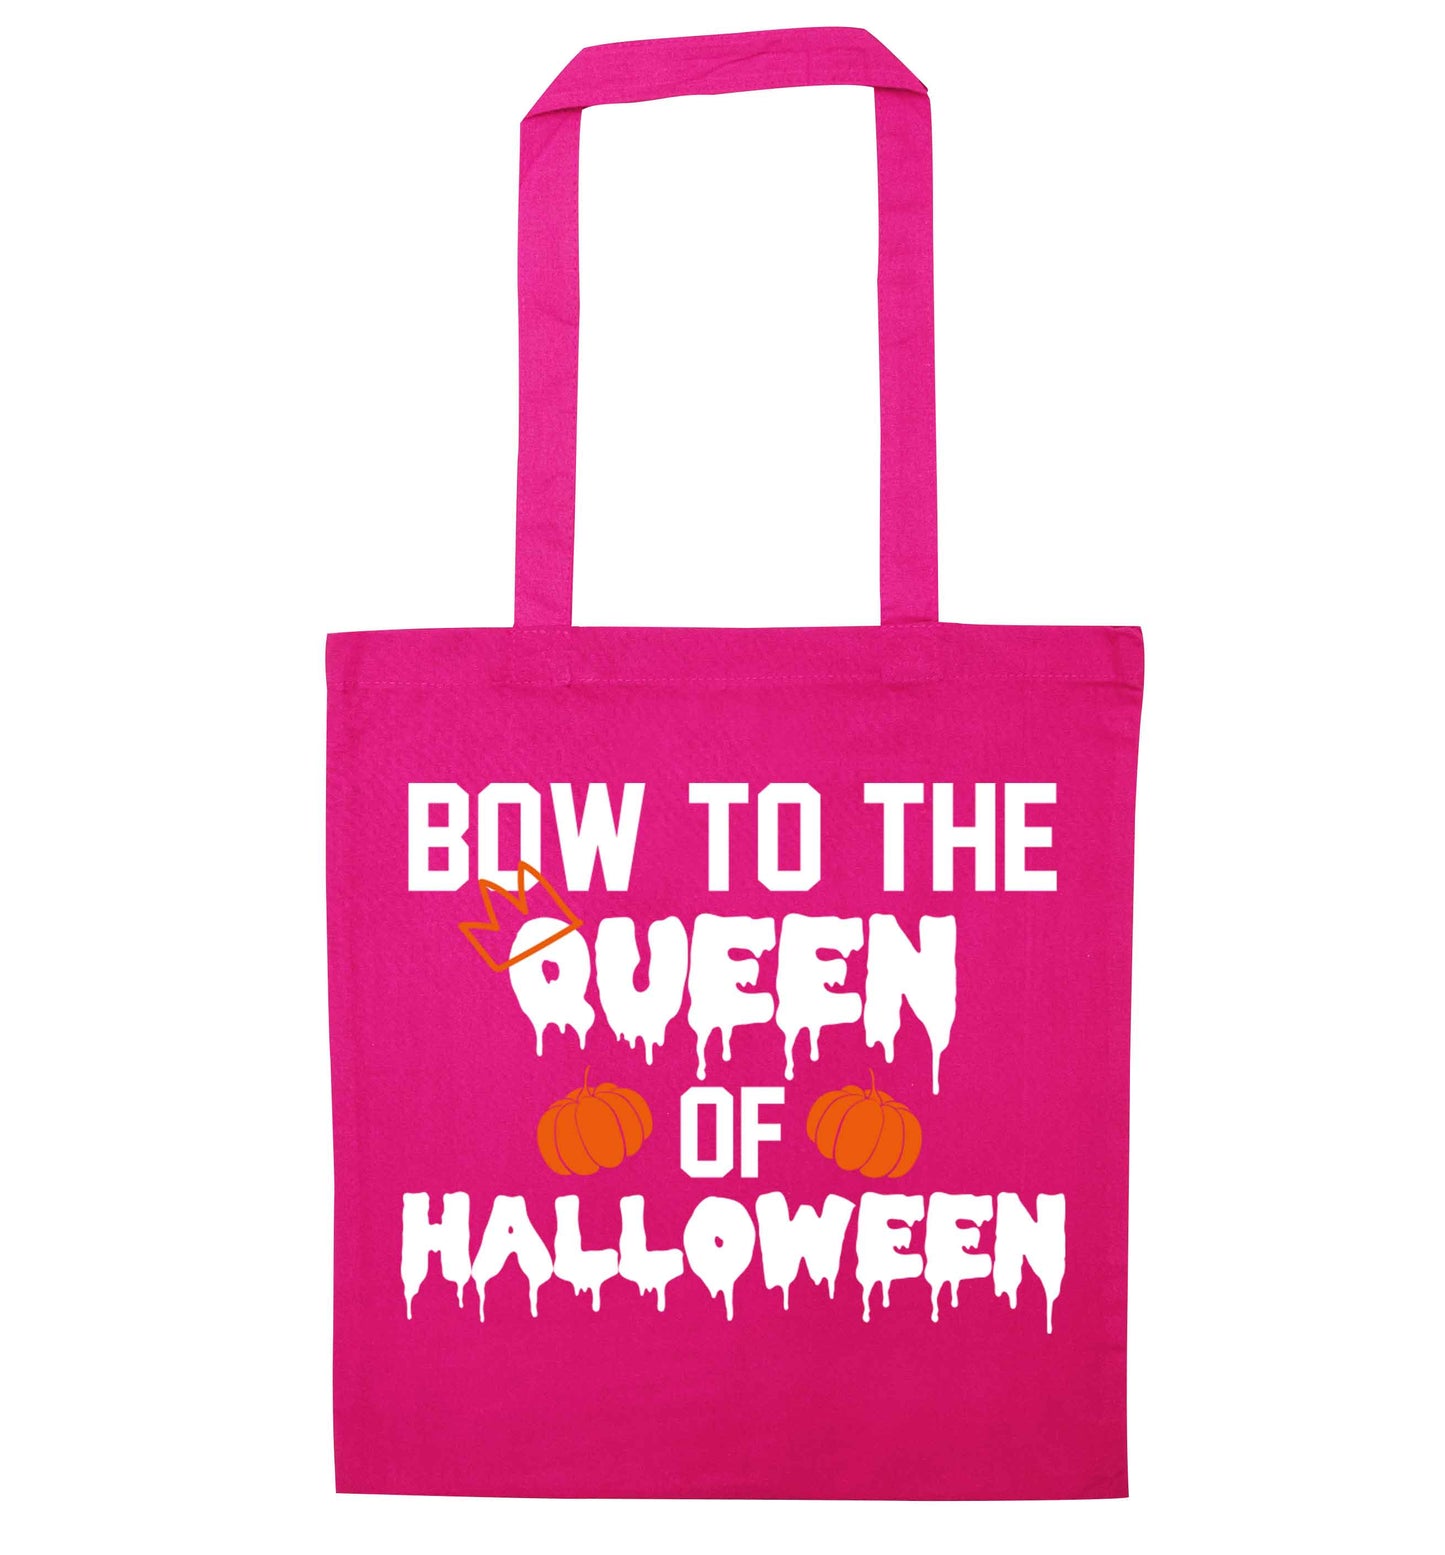 Bow to the Queen of halloween pink tote bag